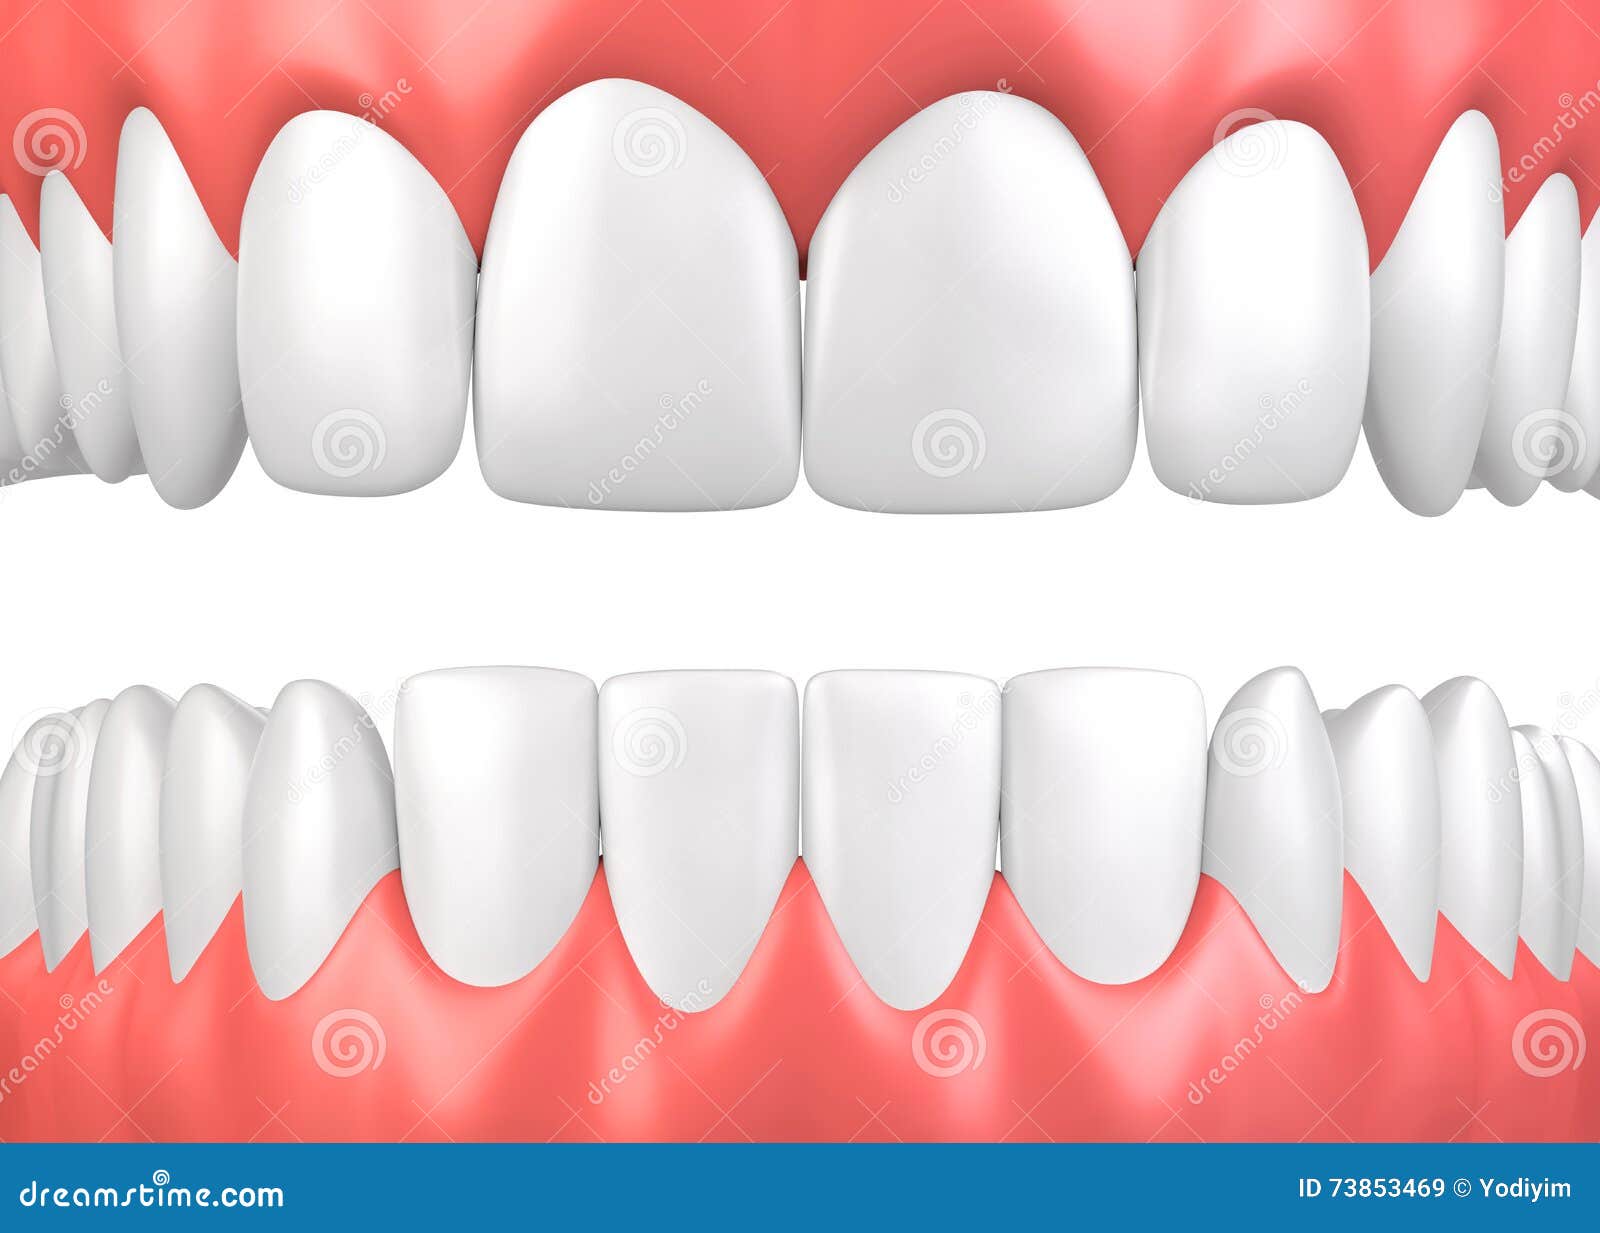 3d Illustration Of Teeth With Tartar Showing Four Different Phases In